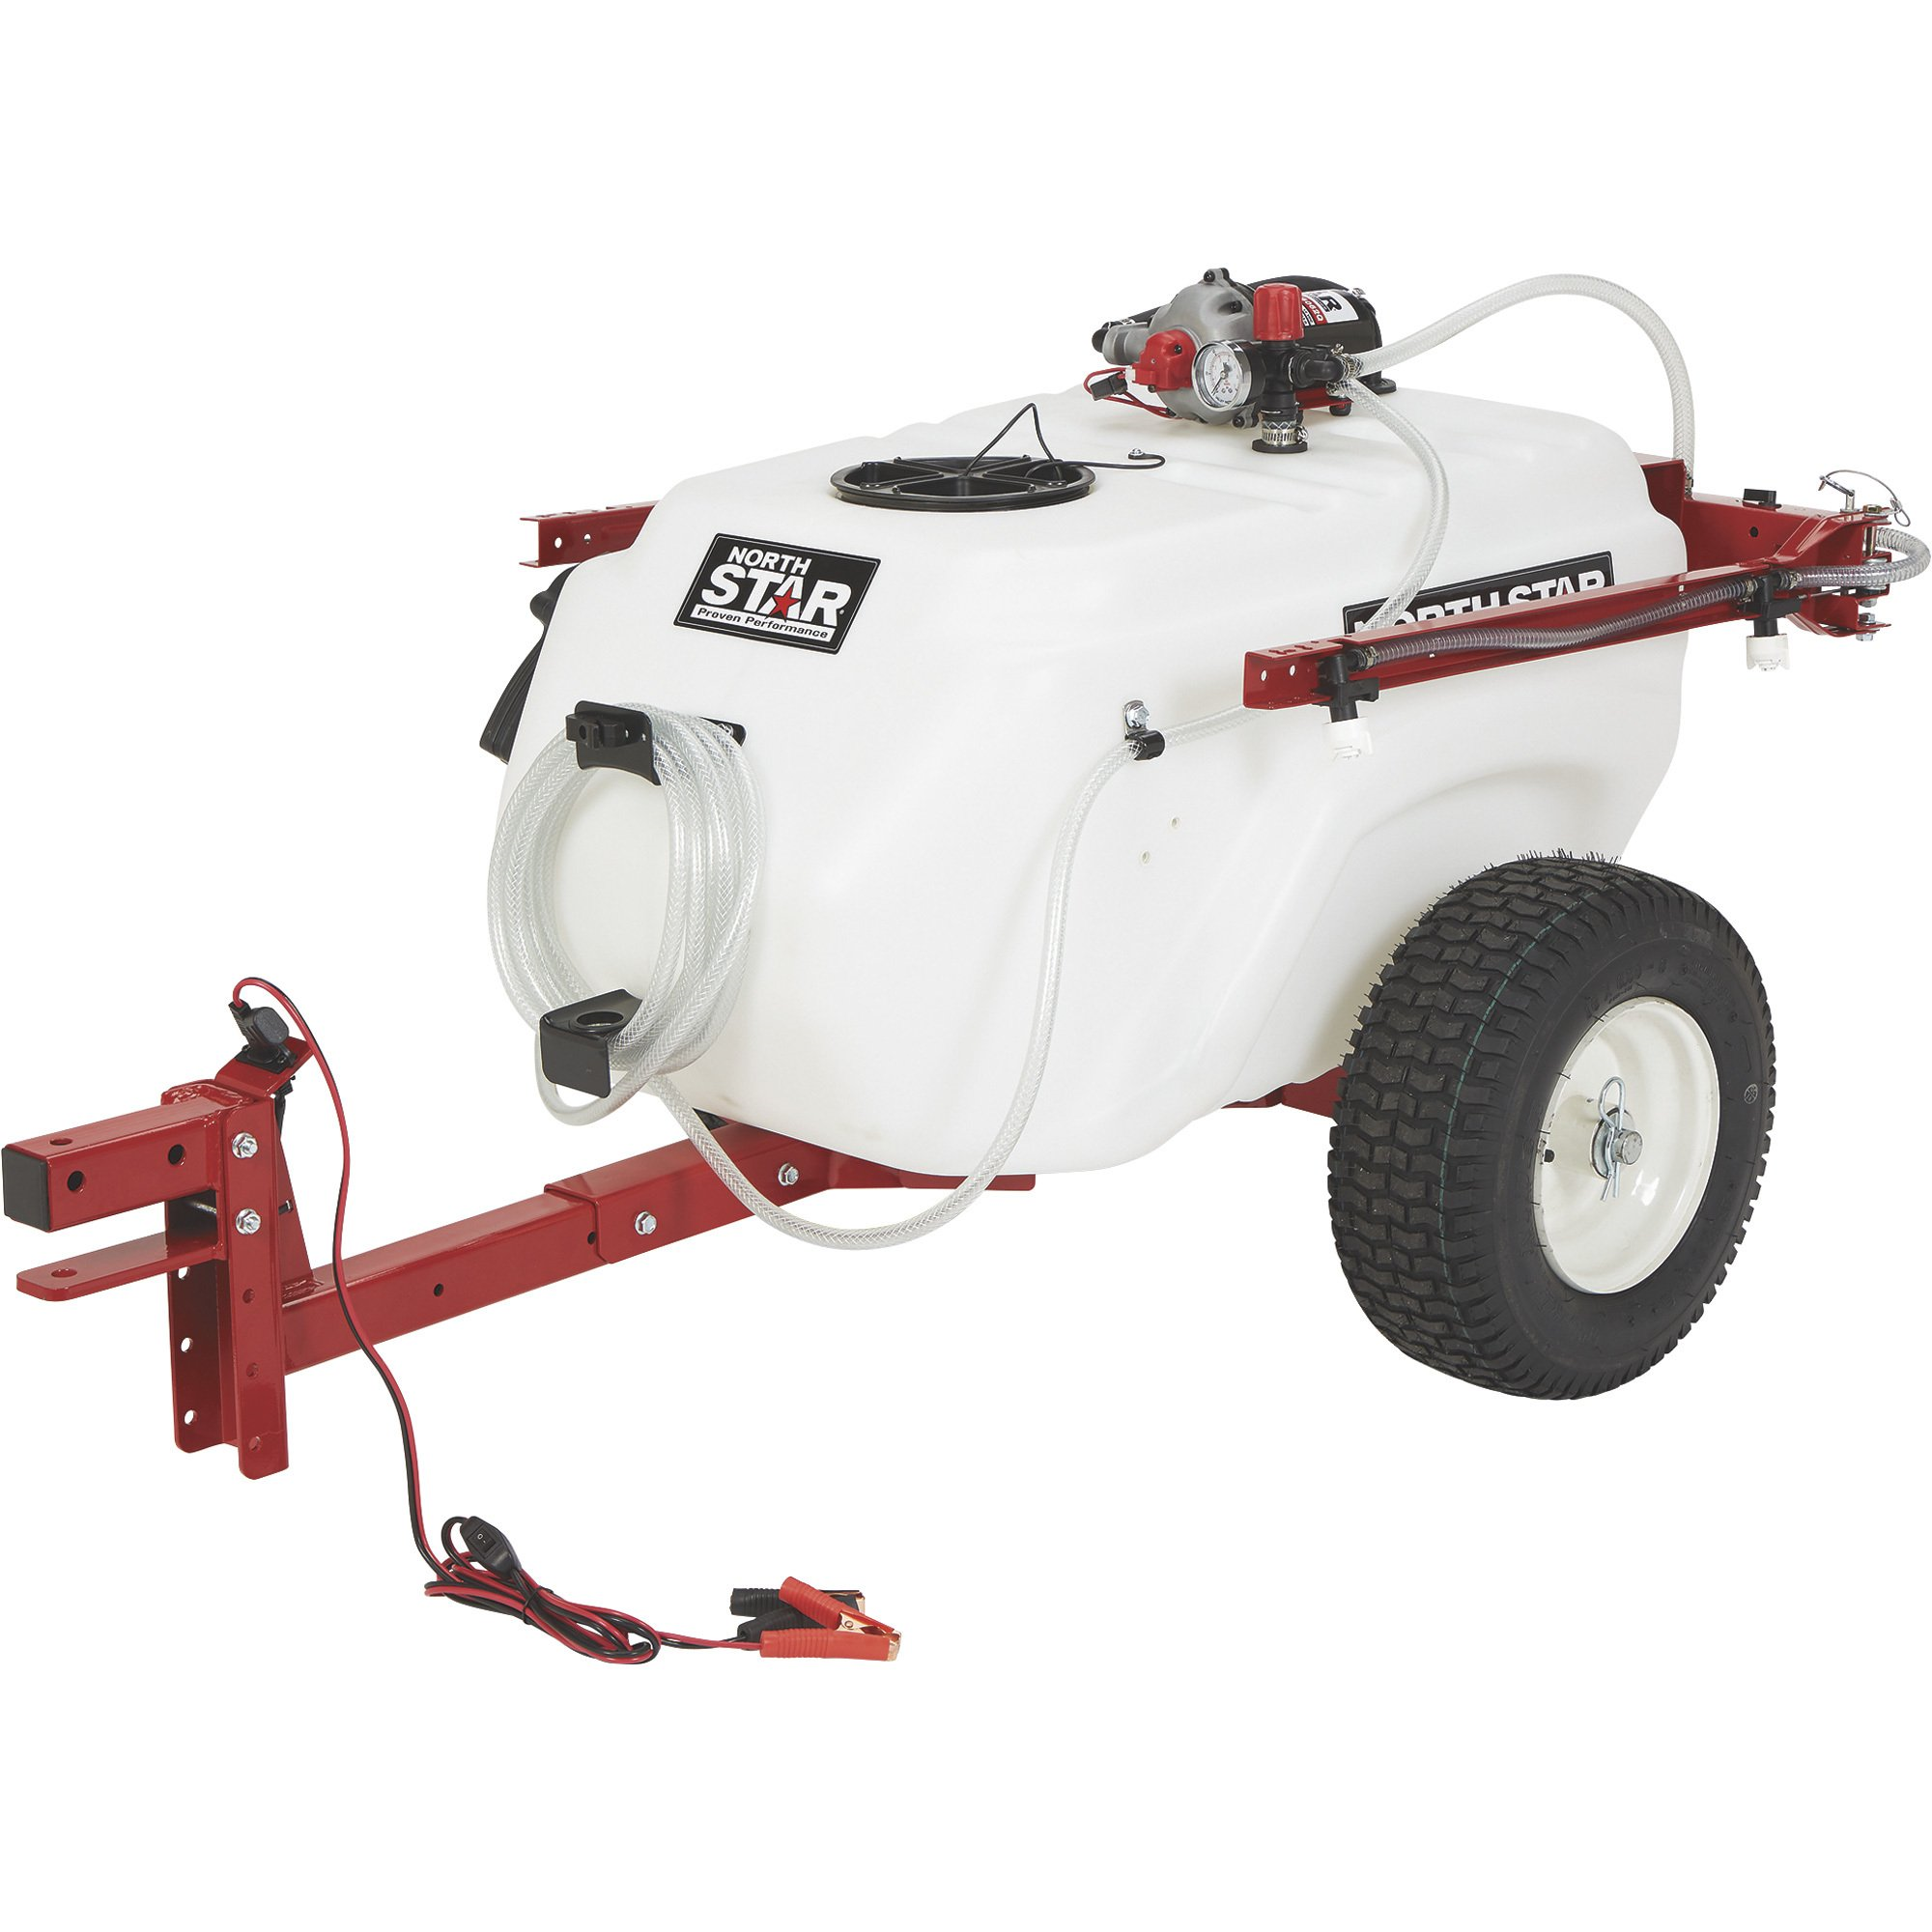 NorthStar, NorthStar Tow Behind Trailer Boom Broadcast and Spot Sprayer 41 Gallon Capacity 60 PSI 12V DC 4.0 GPM 282585 New